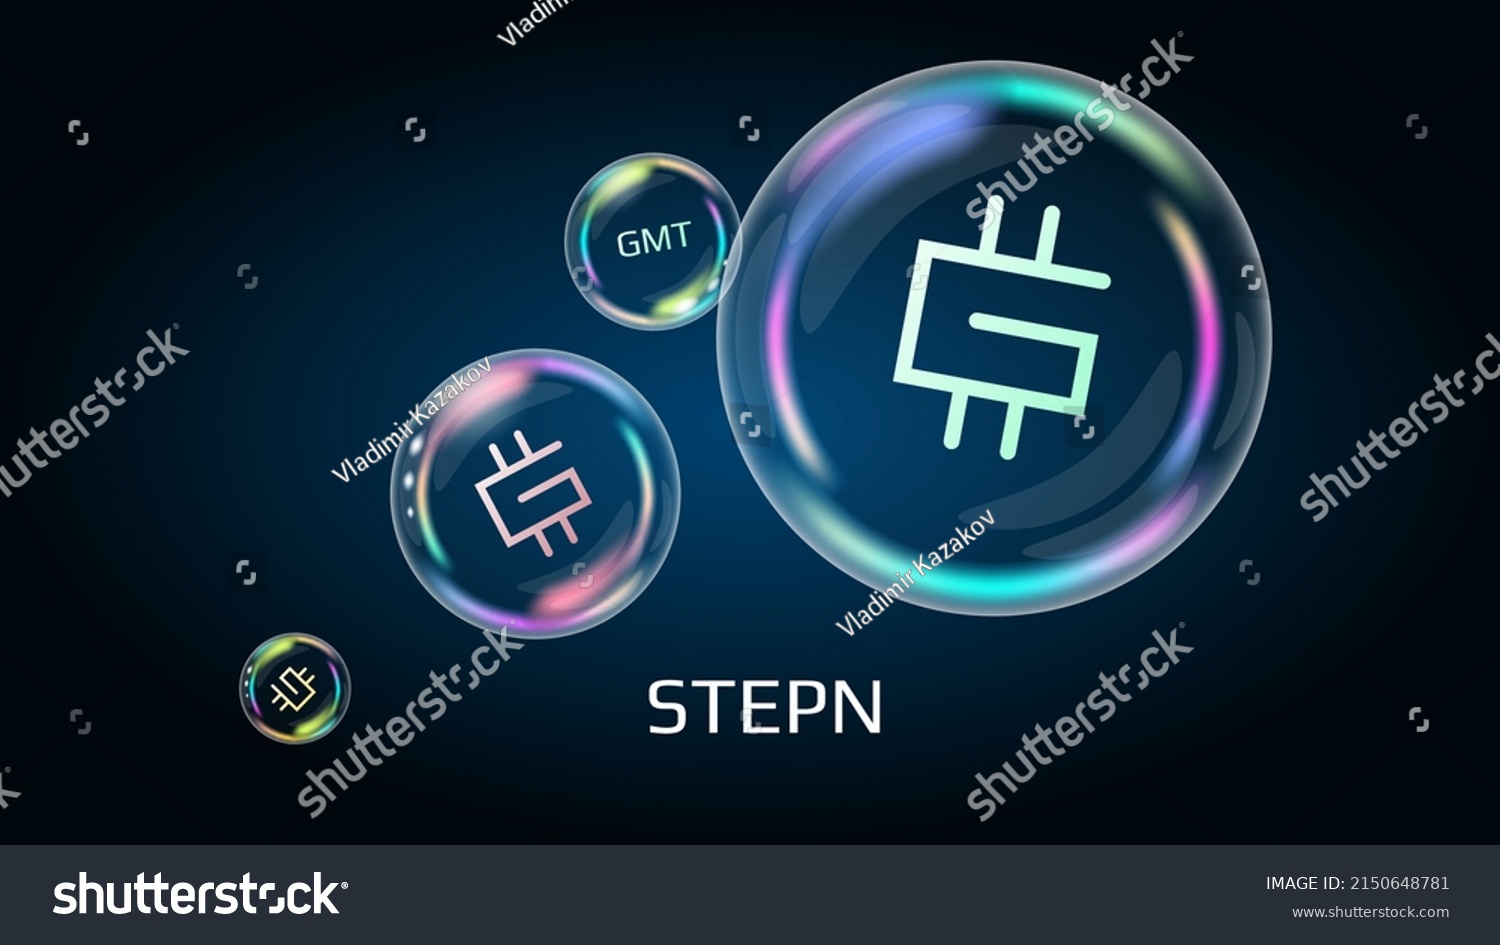 SVG of Stepn GMT token symbol in soap bubble. The financial pyramid will burst soon and destroyed. Vector illustration. svg